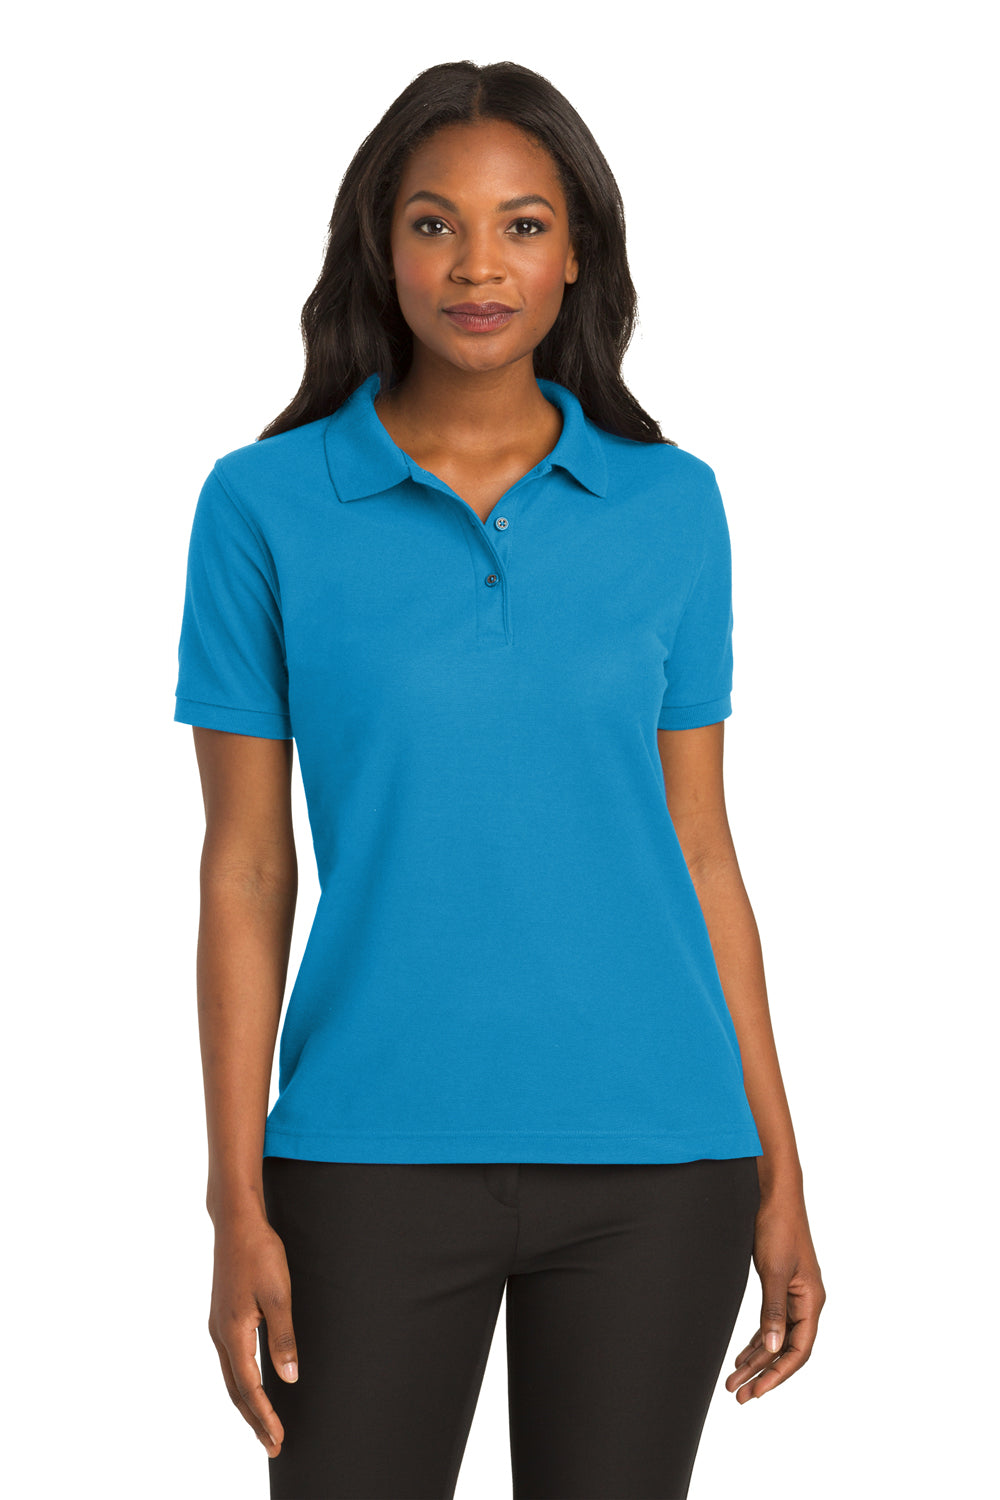 Port Authority L500 Womens Silk Touch Wrinkle Resistant Short Sleeve Polo Shirt Turquoise Blue Front